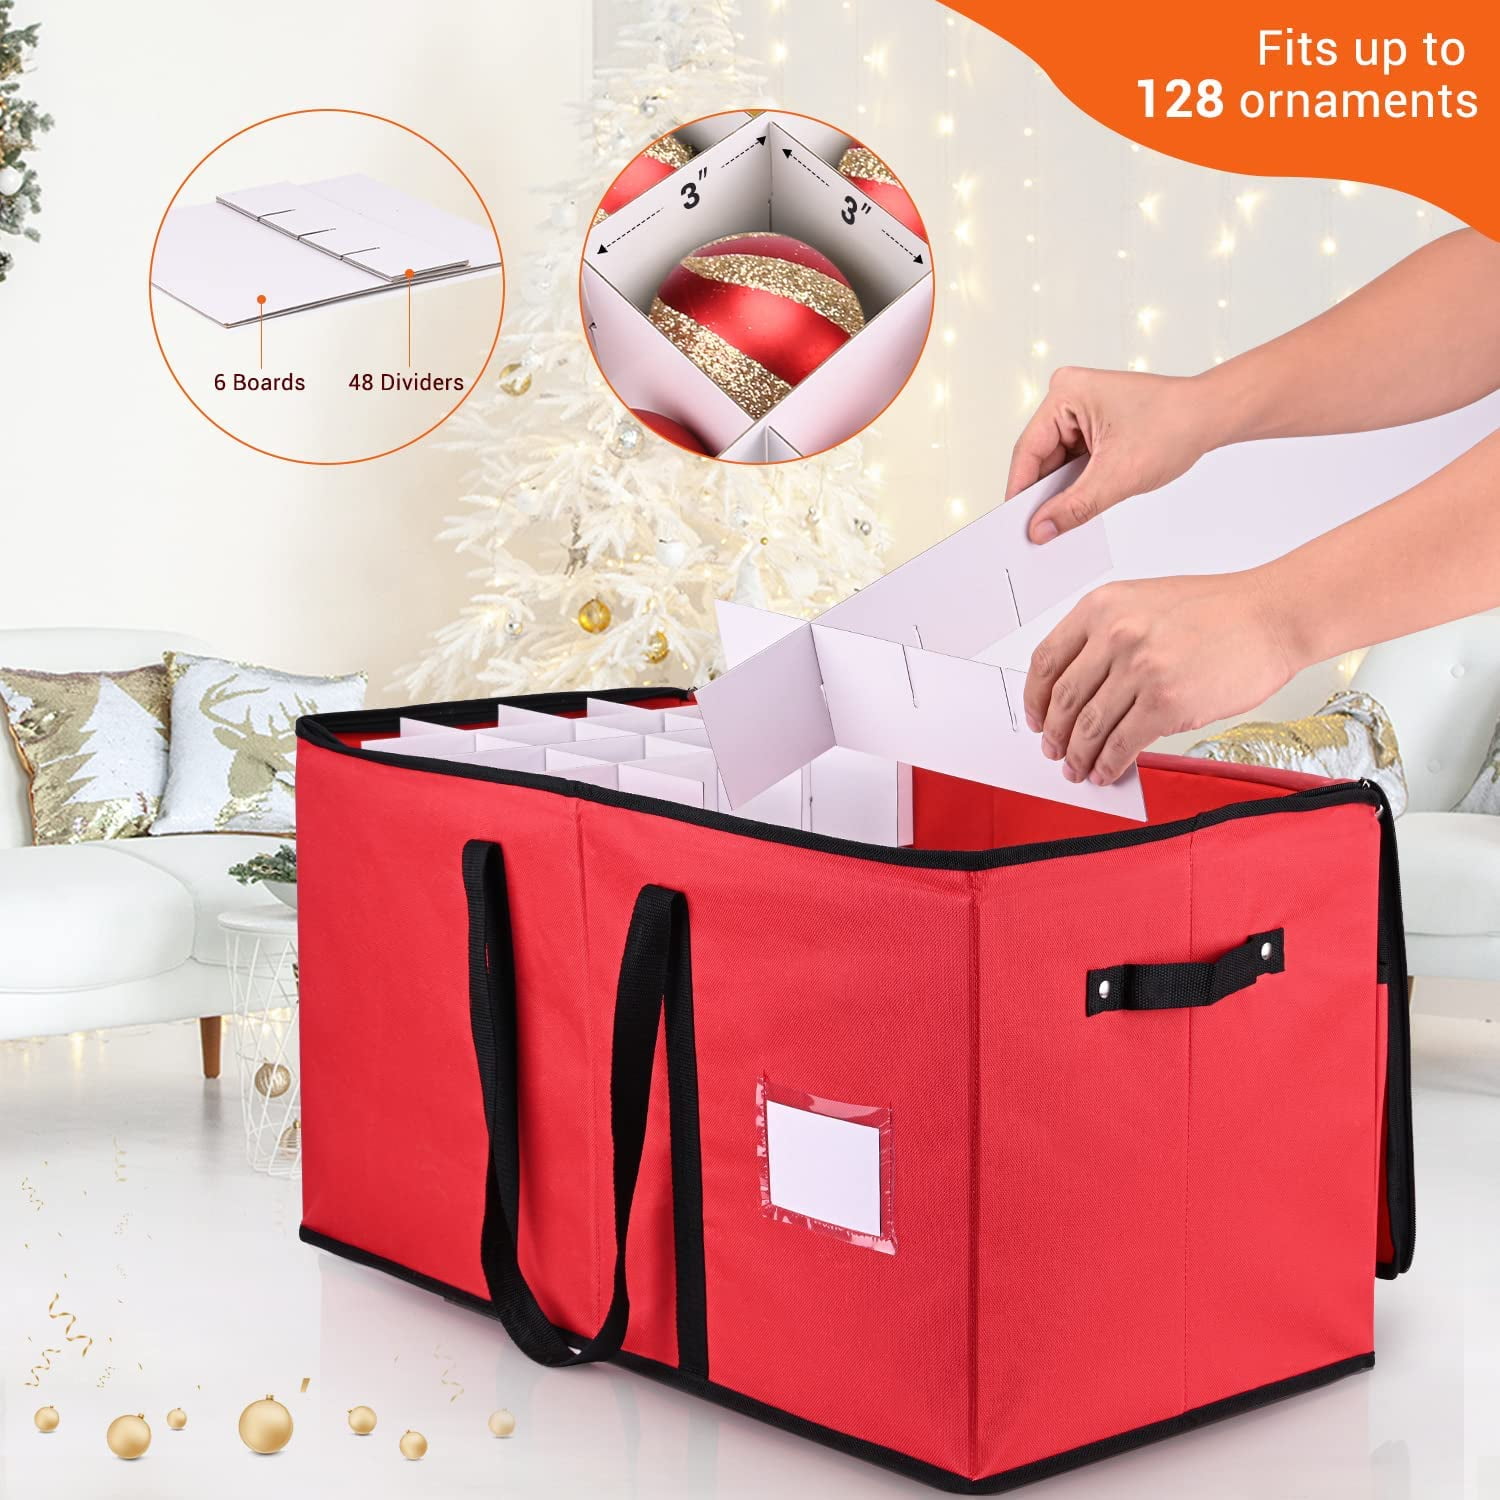  Keten Christmas Ornament Storage, Ornament Storage Box Fits 128  Holiday Ornaments 3-Inch,with Adjustable Dividers & Pockets, Dual Zipper  Closure, 600D Tear-Proof Fabric (Red) : Everything Else